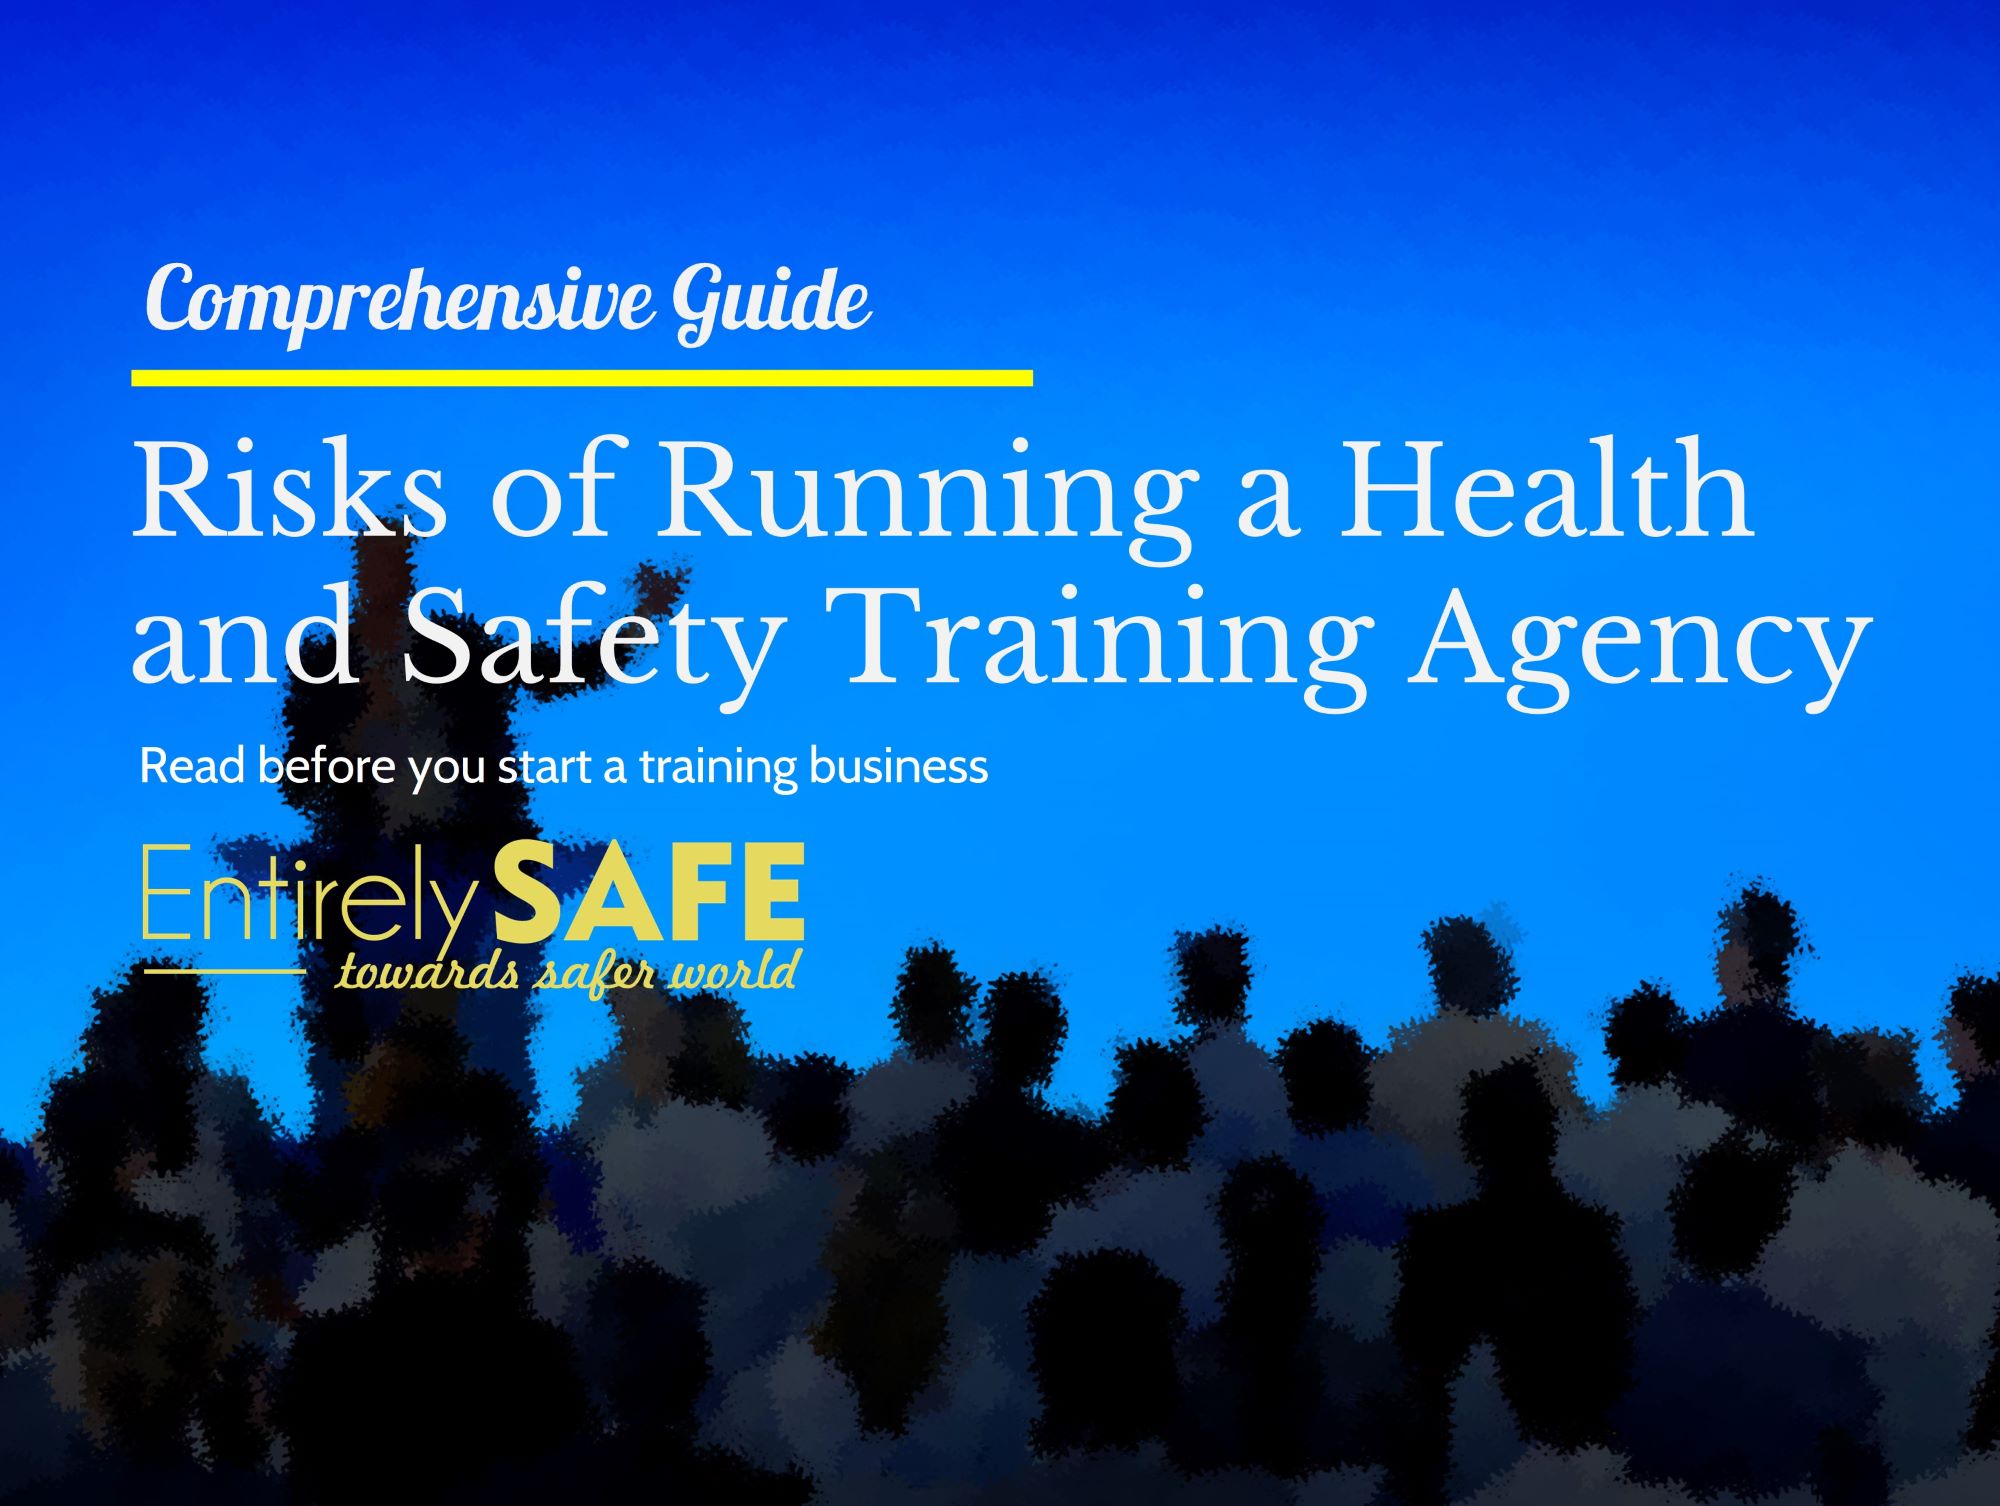 navigating-the-risks-of-running-a-health-and-safety-training-agency-a